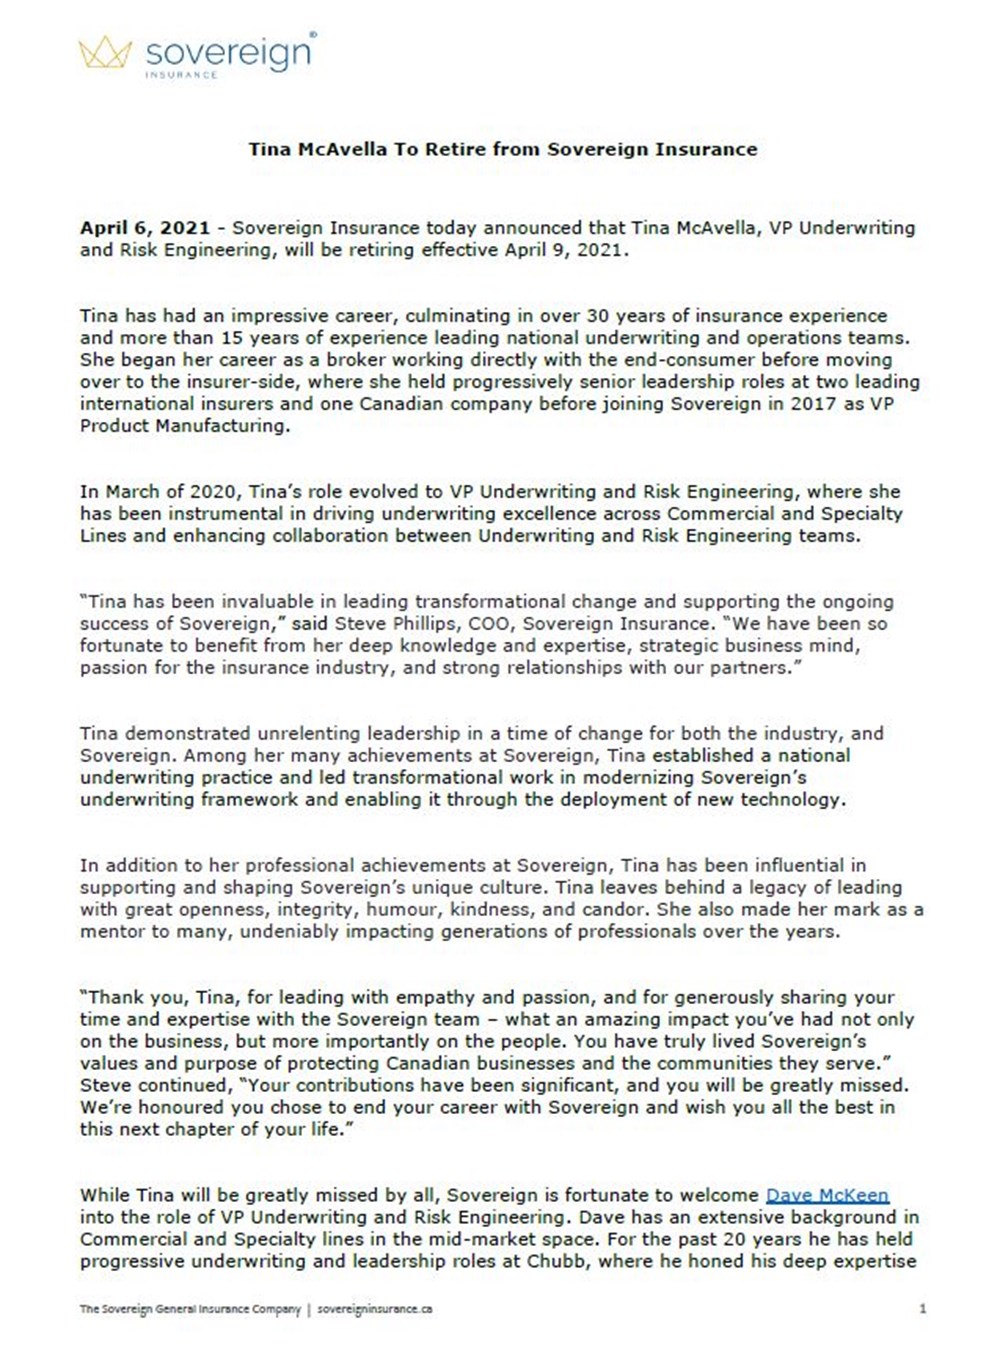 Screenshot of the press release in English